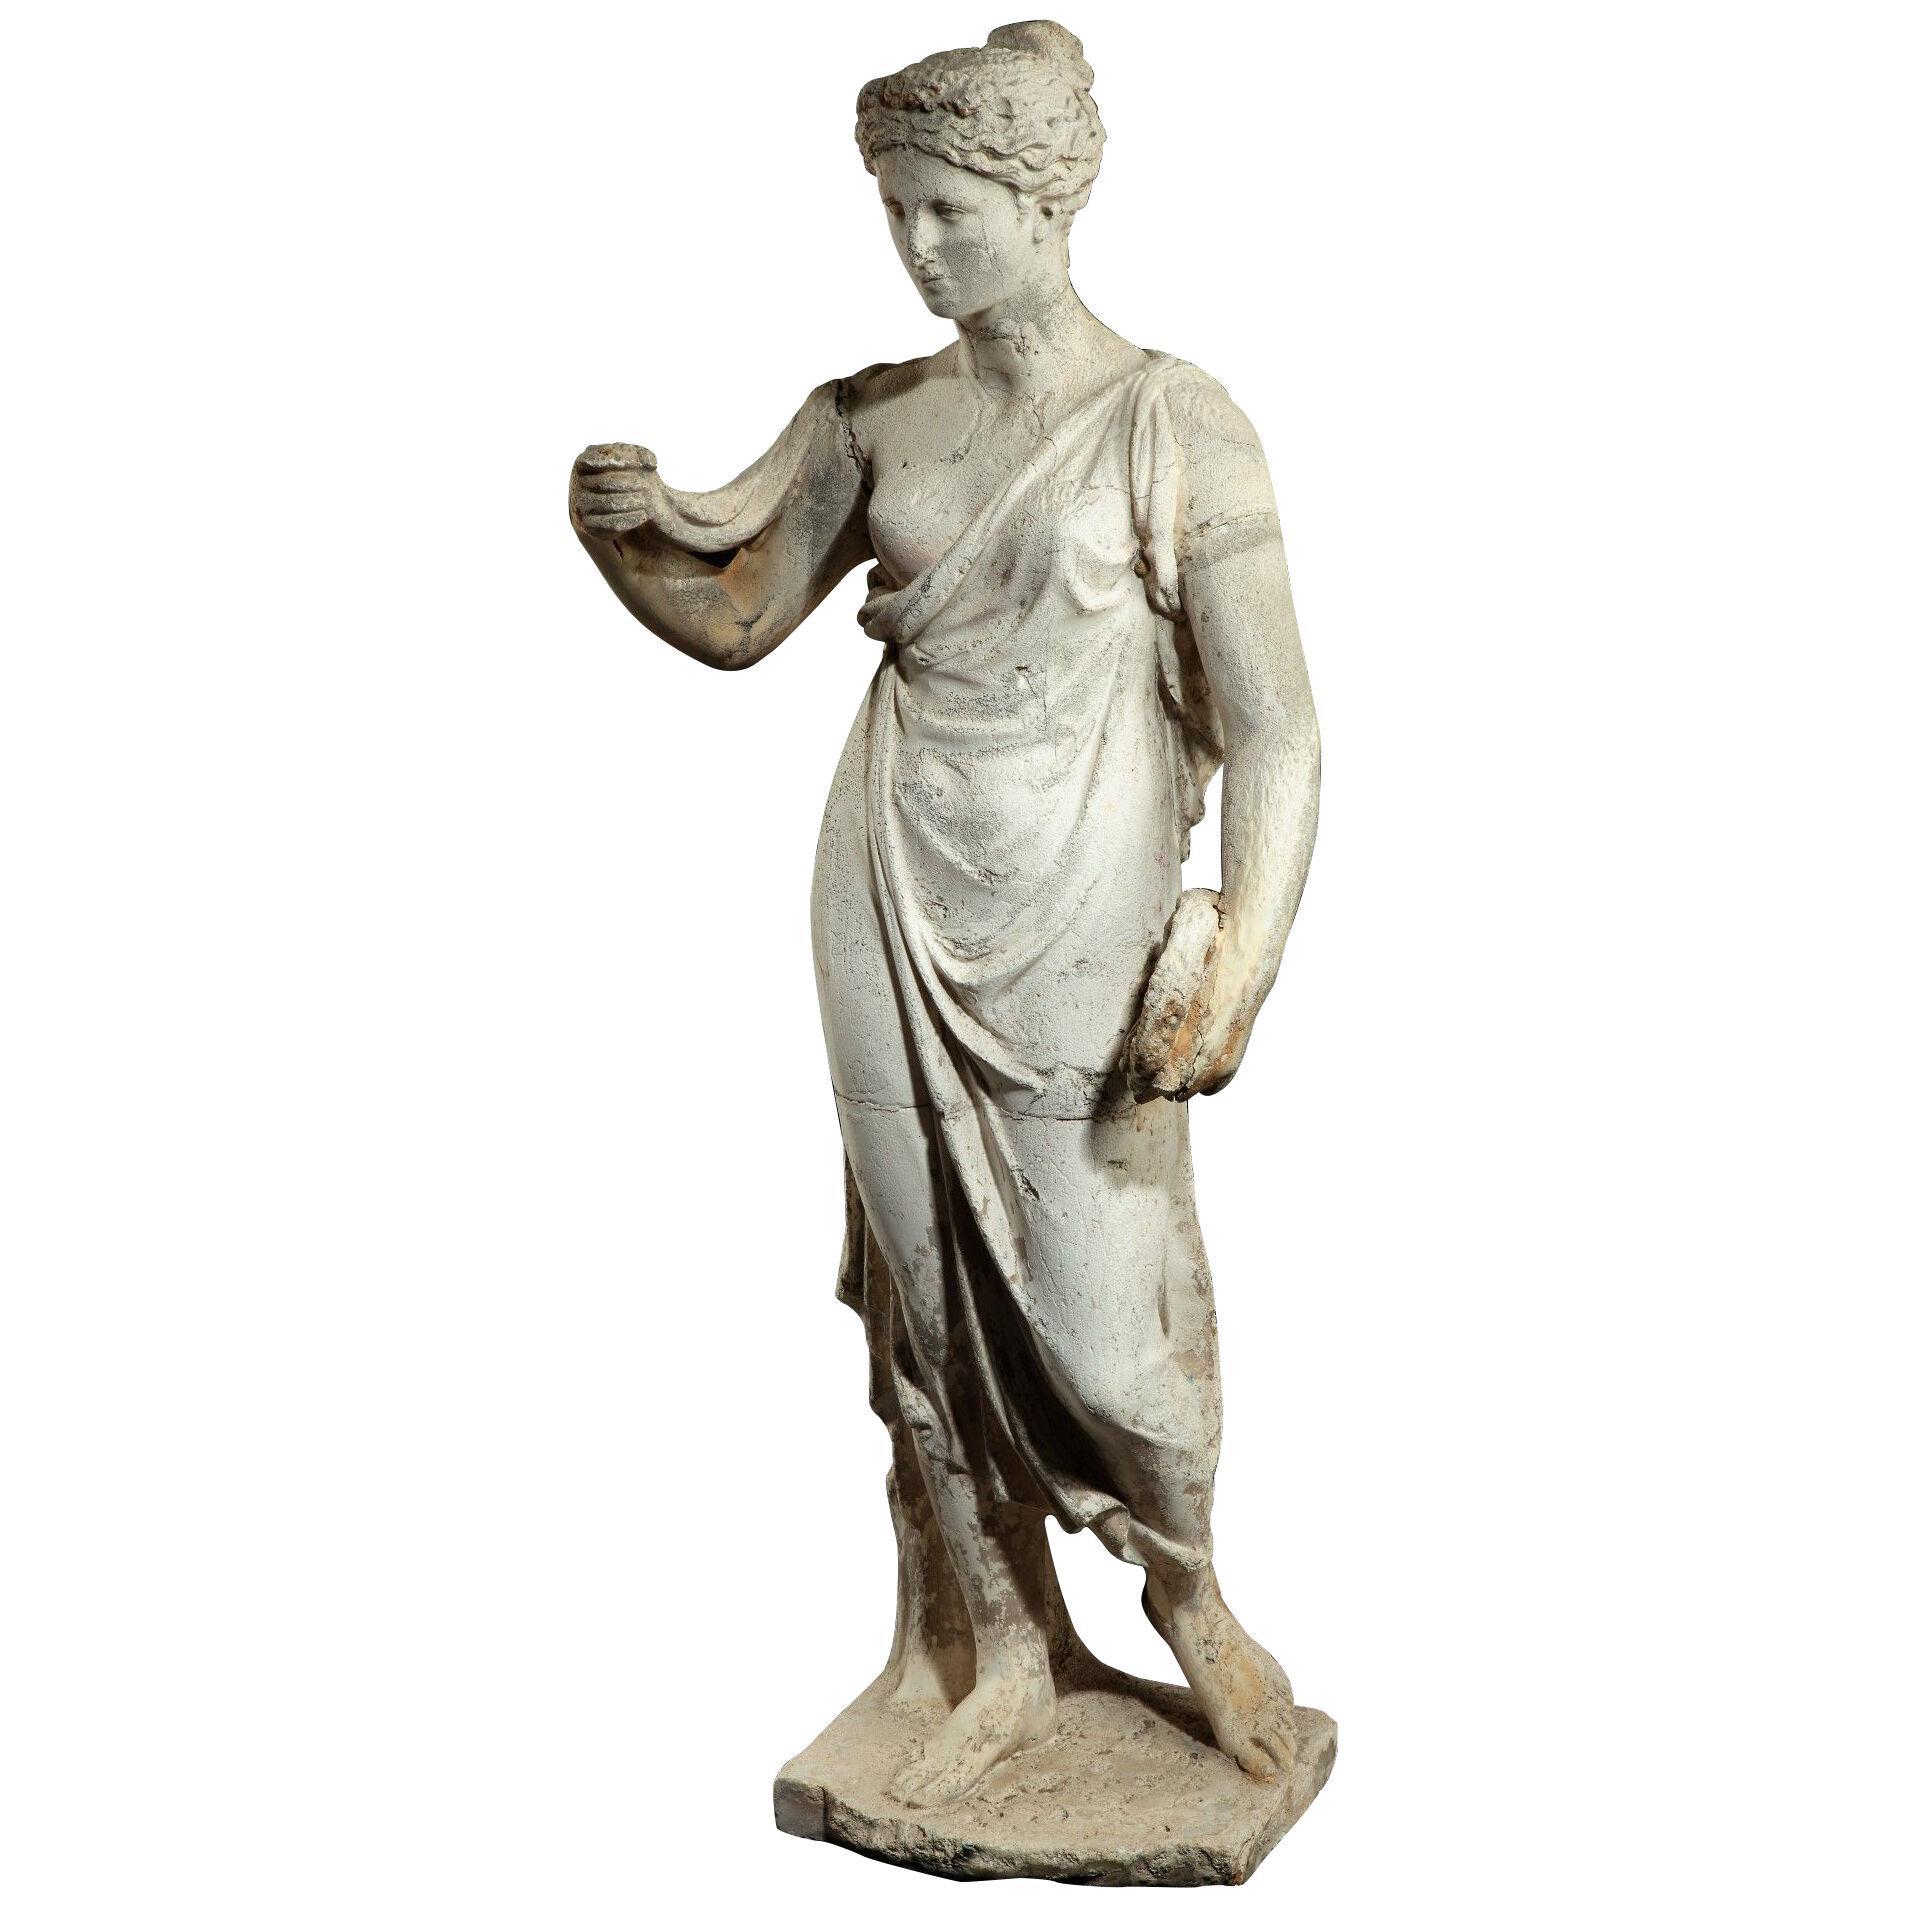 Regency Neoclassical stucco figure in the manner of Hopper